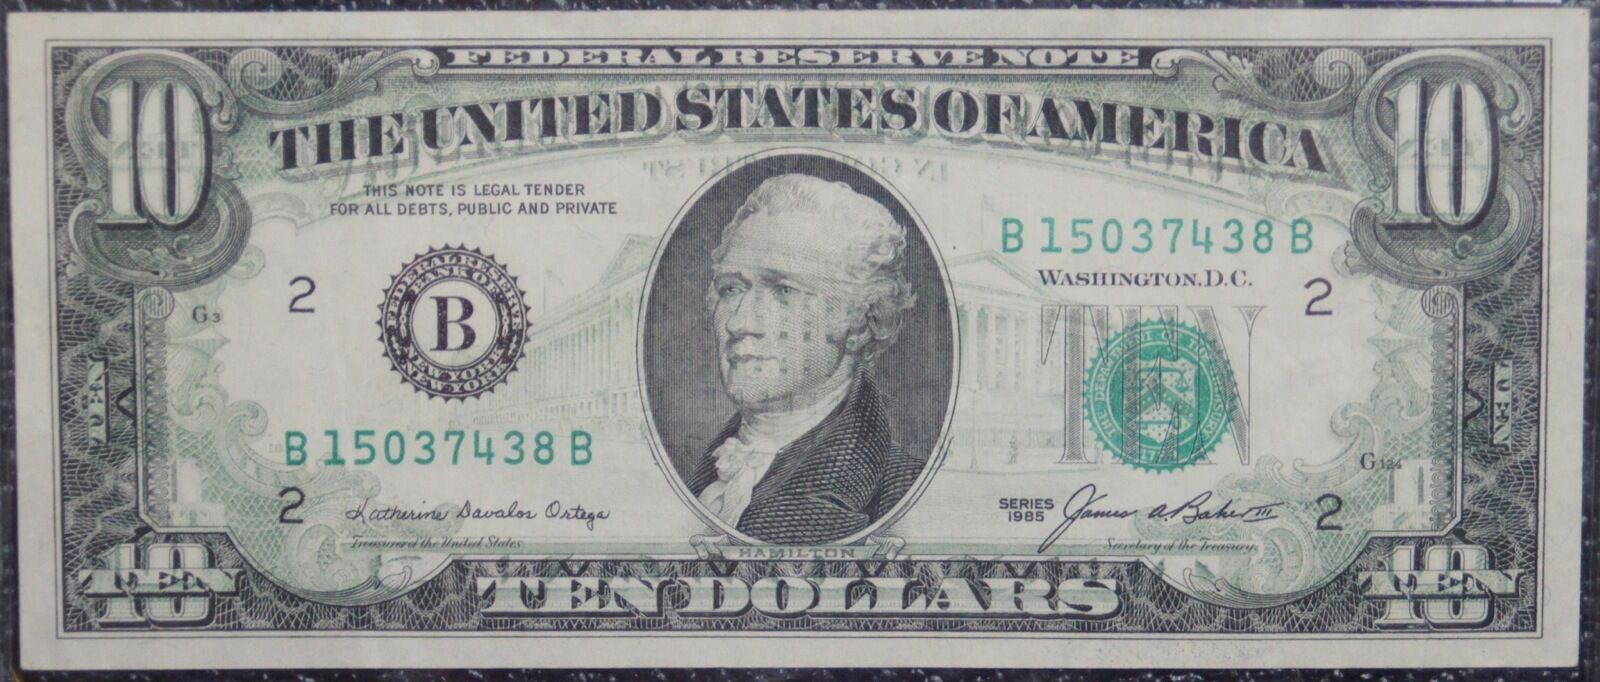 THE UNITED STATES OF AMERICA -1985 $10 Federal Reserve Note -FULL REVERSE OFFSET